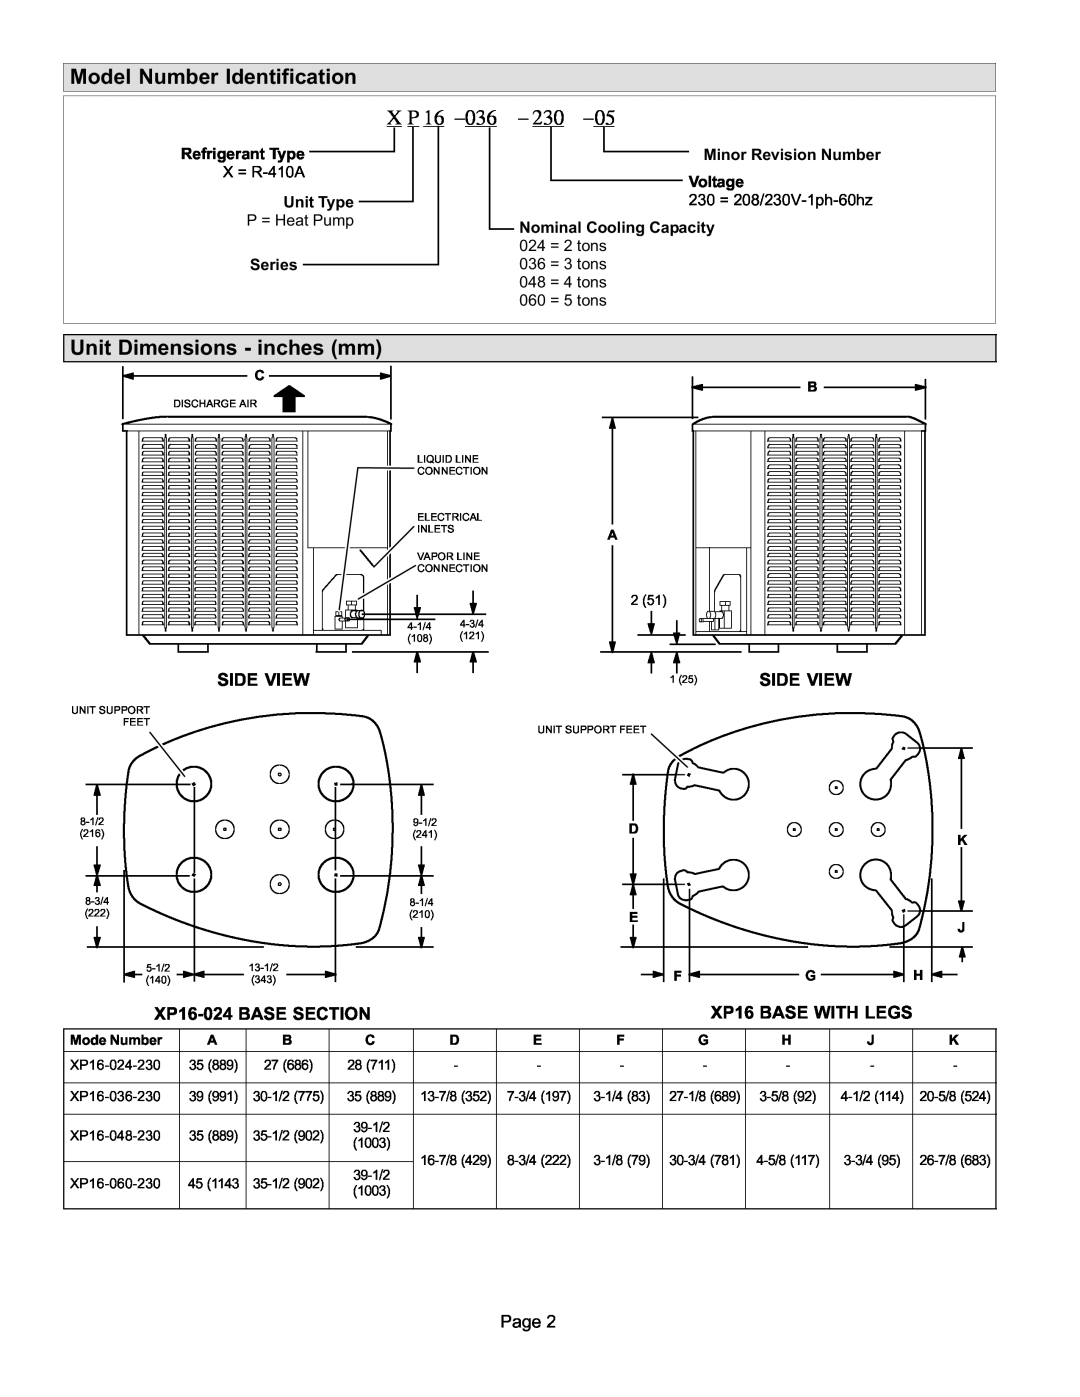 Lenox P506640-01 installation instructions Model Number Identification, Unit Dimensions − inches mm, X P16 −036, 230−05 